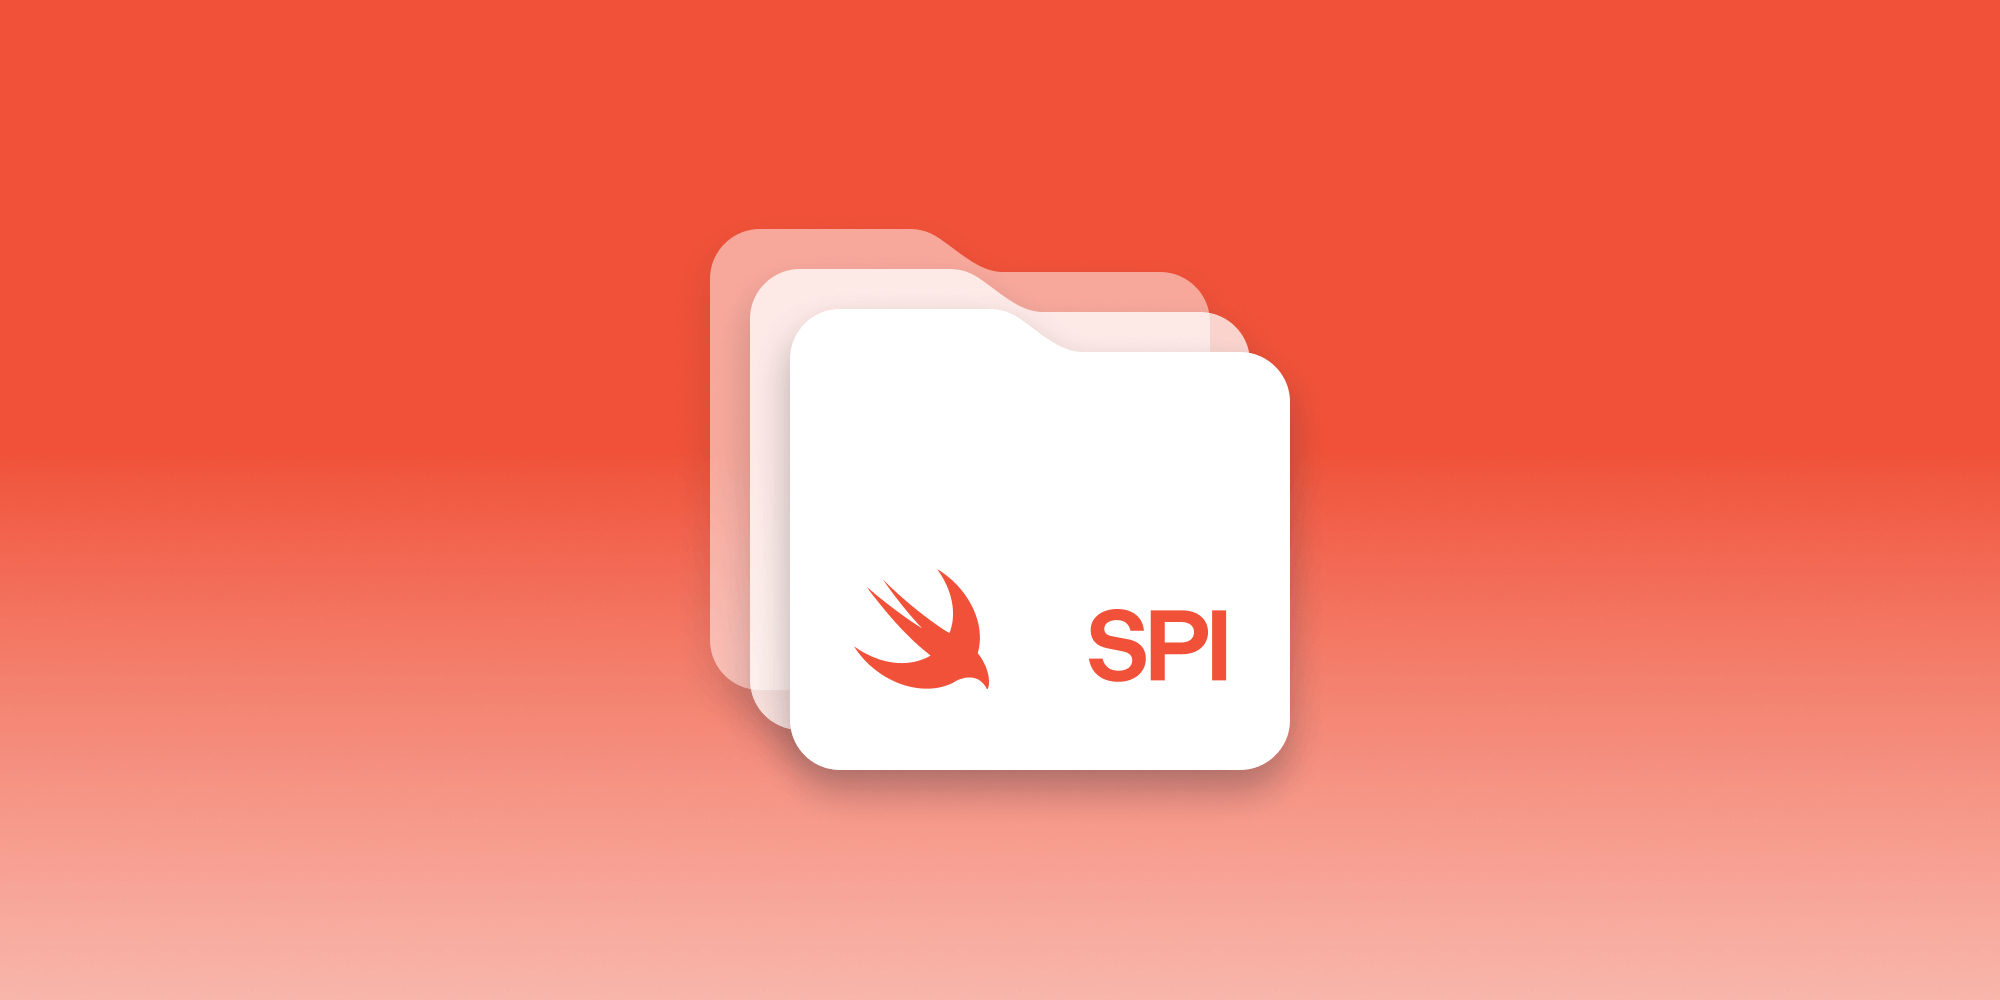 Illustration: Swift's Approach to SPI